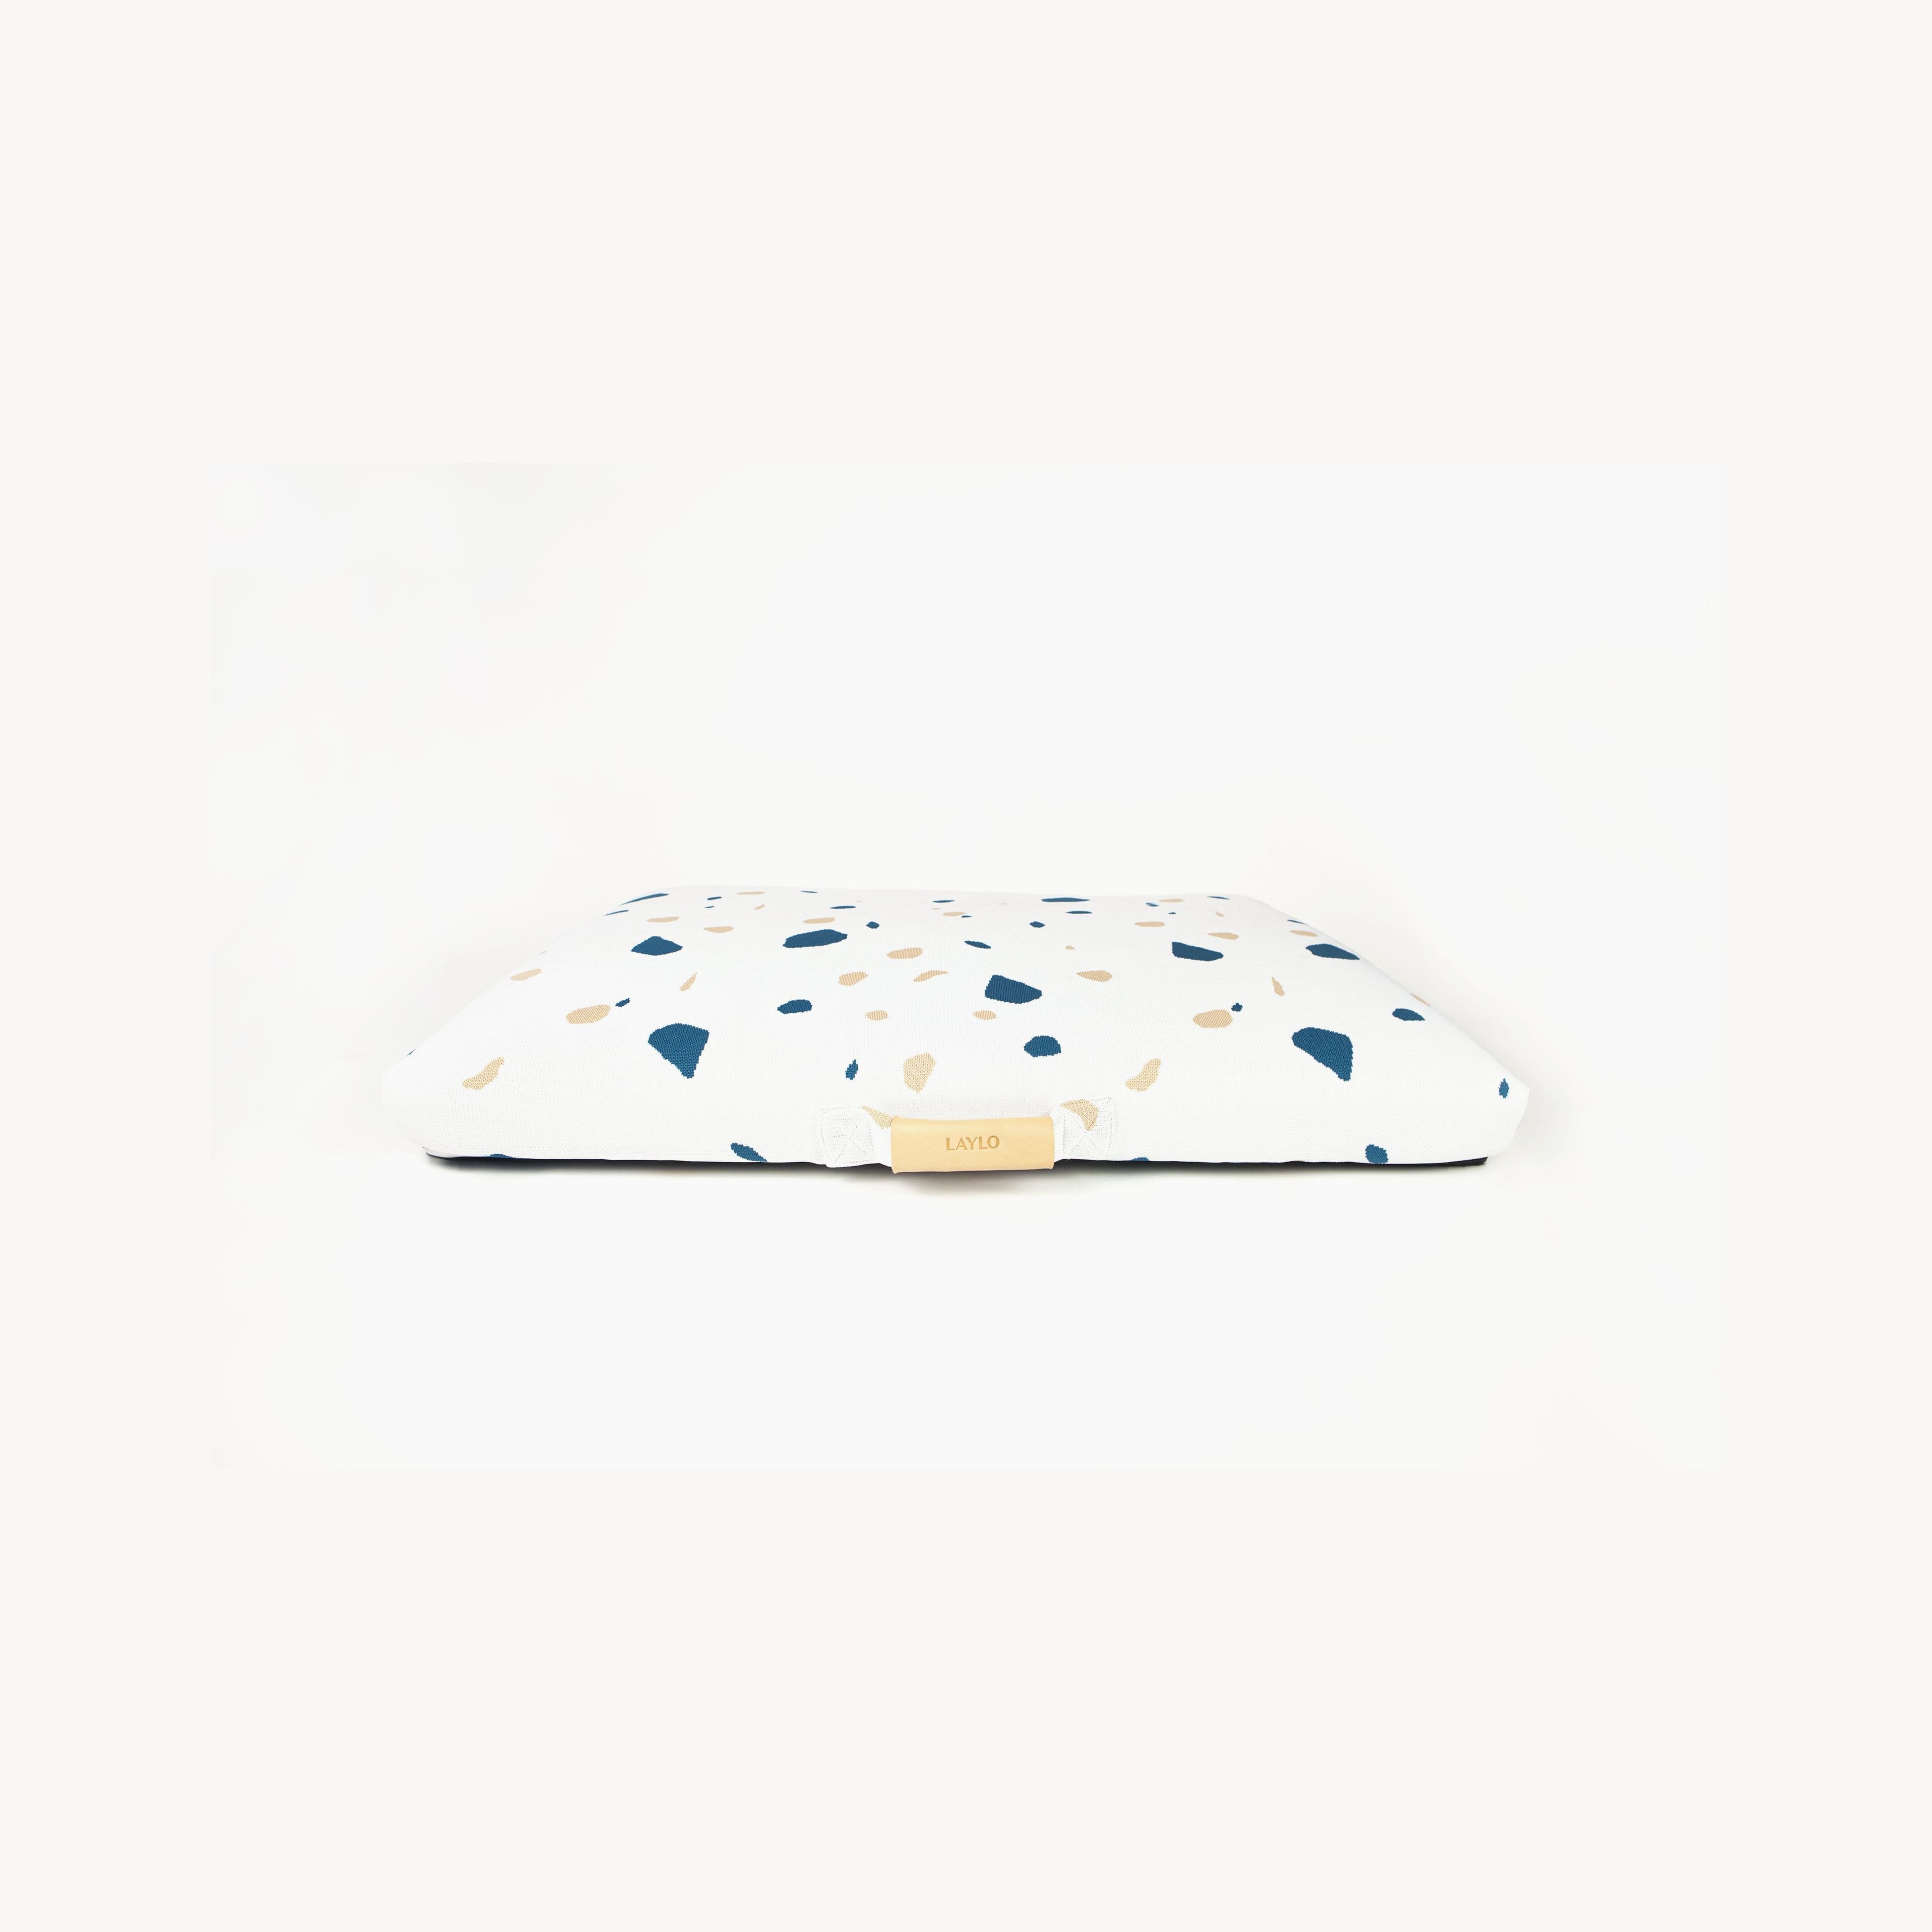 White Terrazzo | Mid-Century Modern Dog Bed or Bed Cover